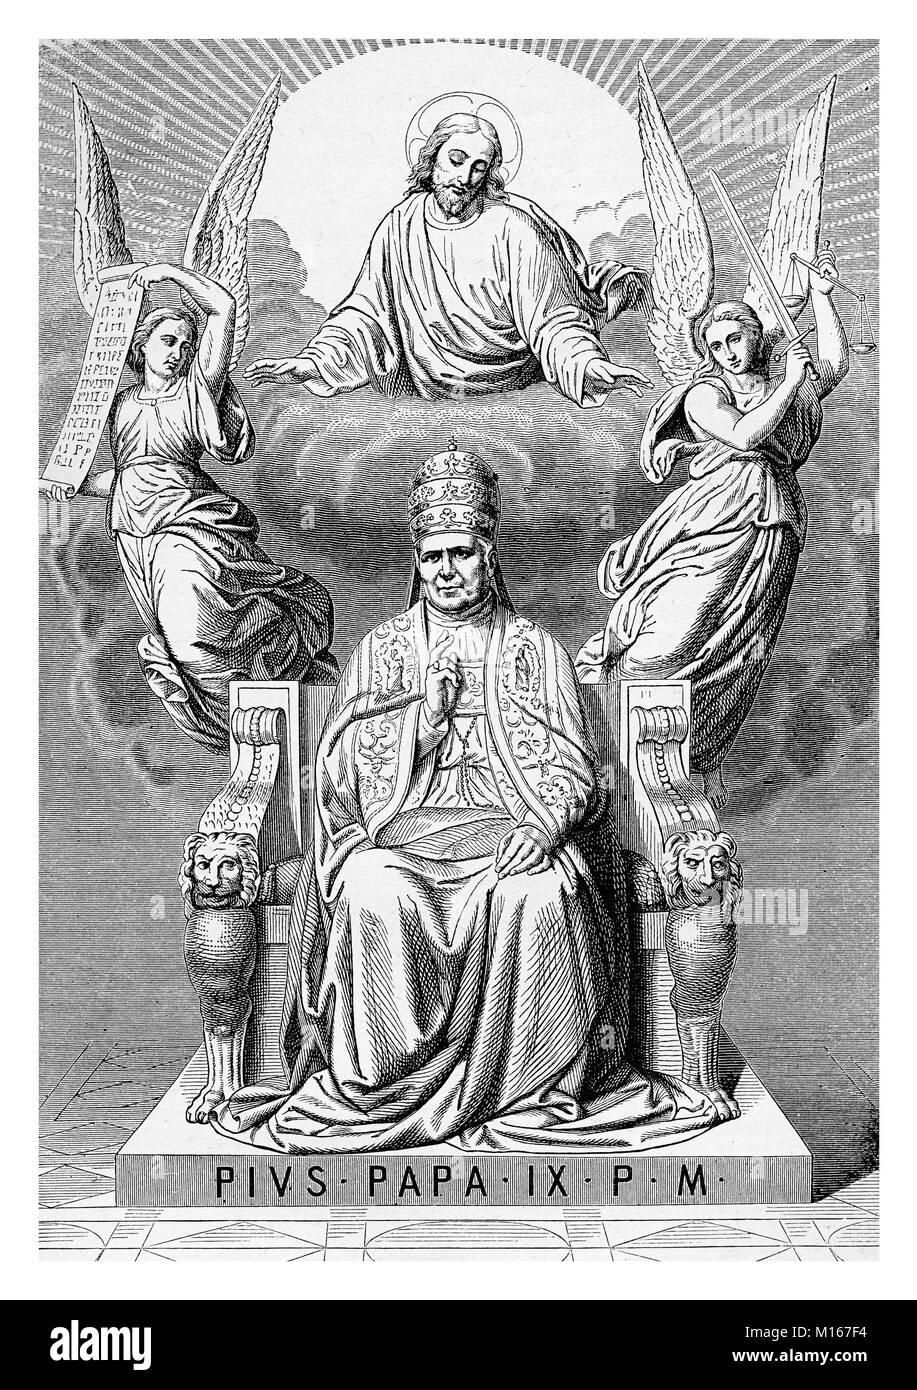 Allegorical apotheosis of Pope Pius IX on his throne, surrounded by angels and Jesus Christ, vintage engraving Stock Photo